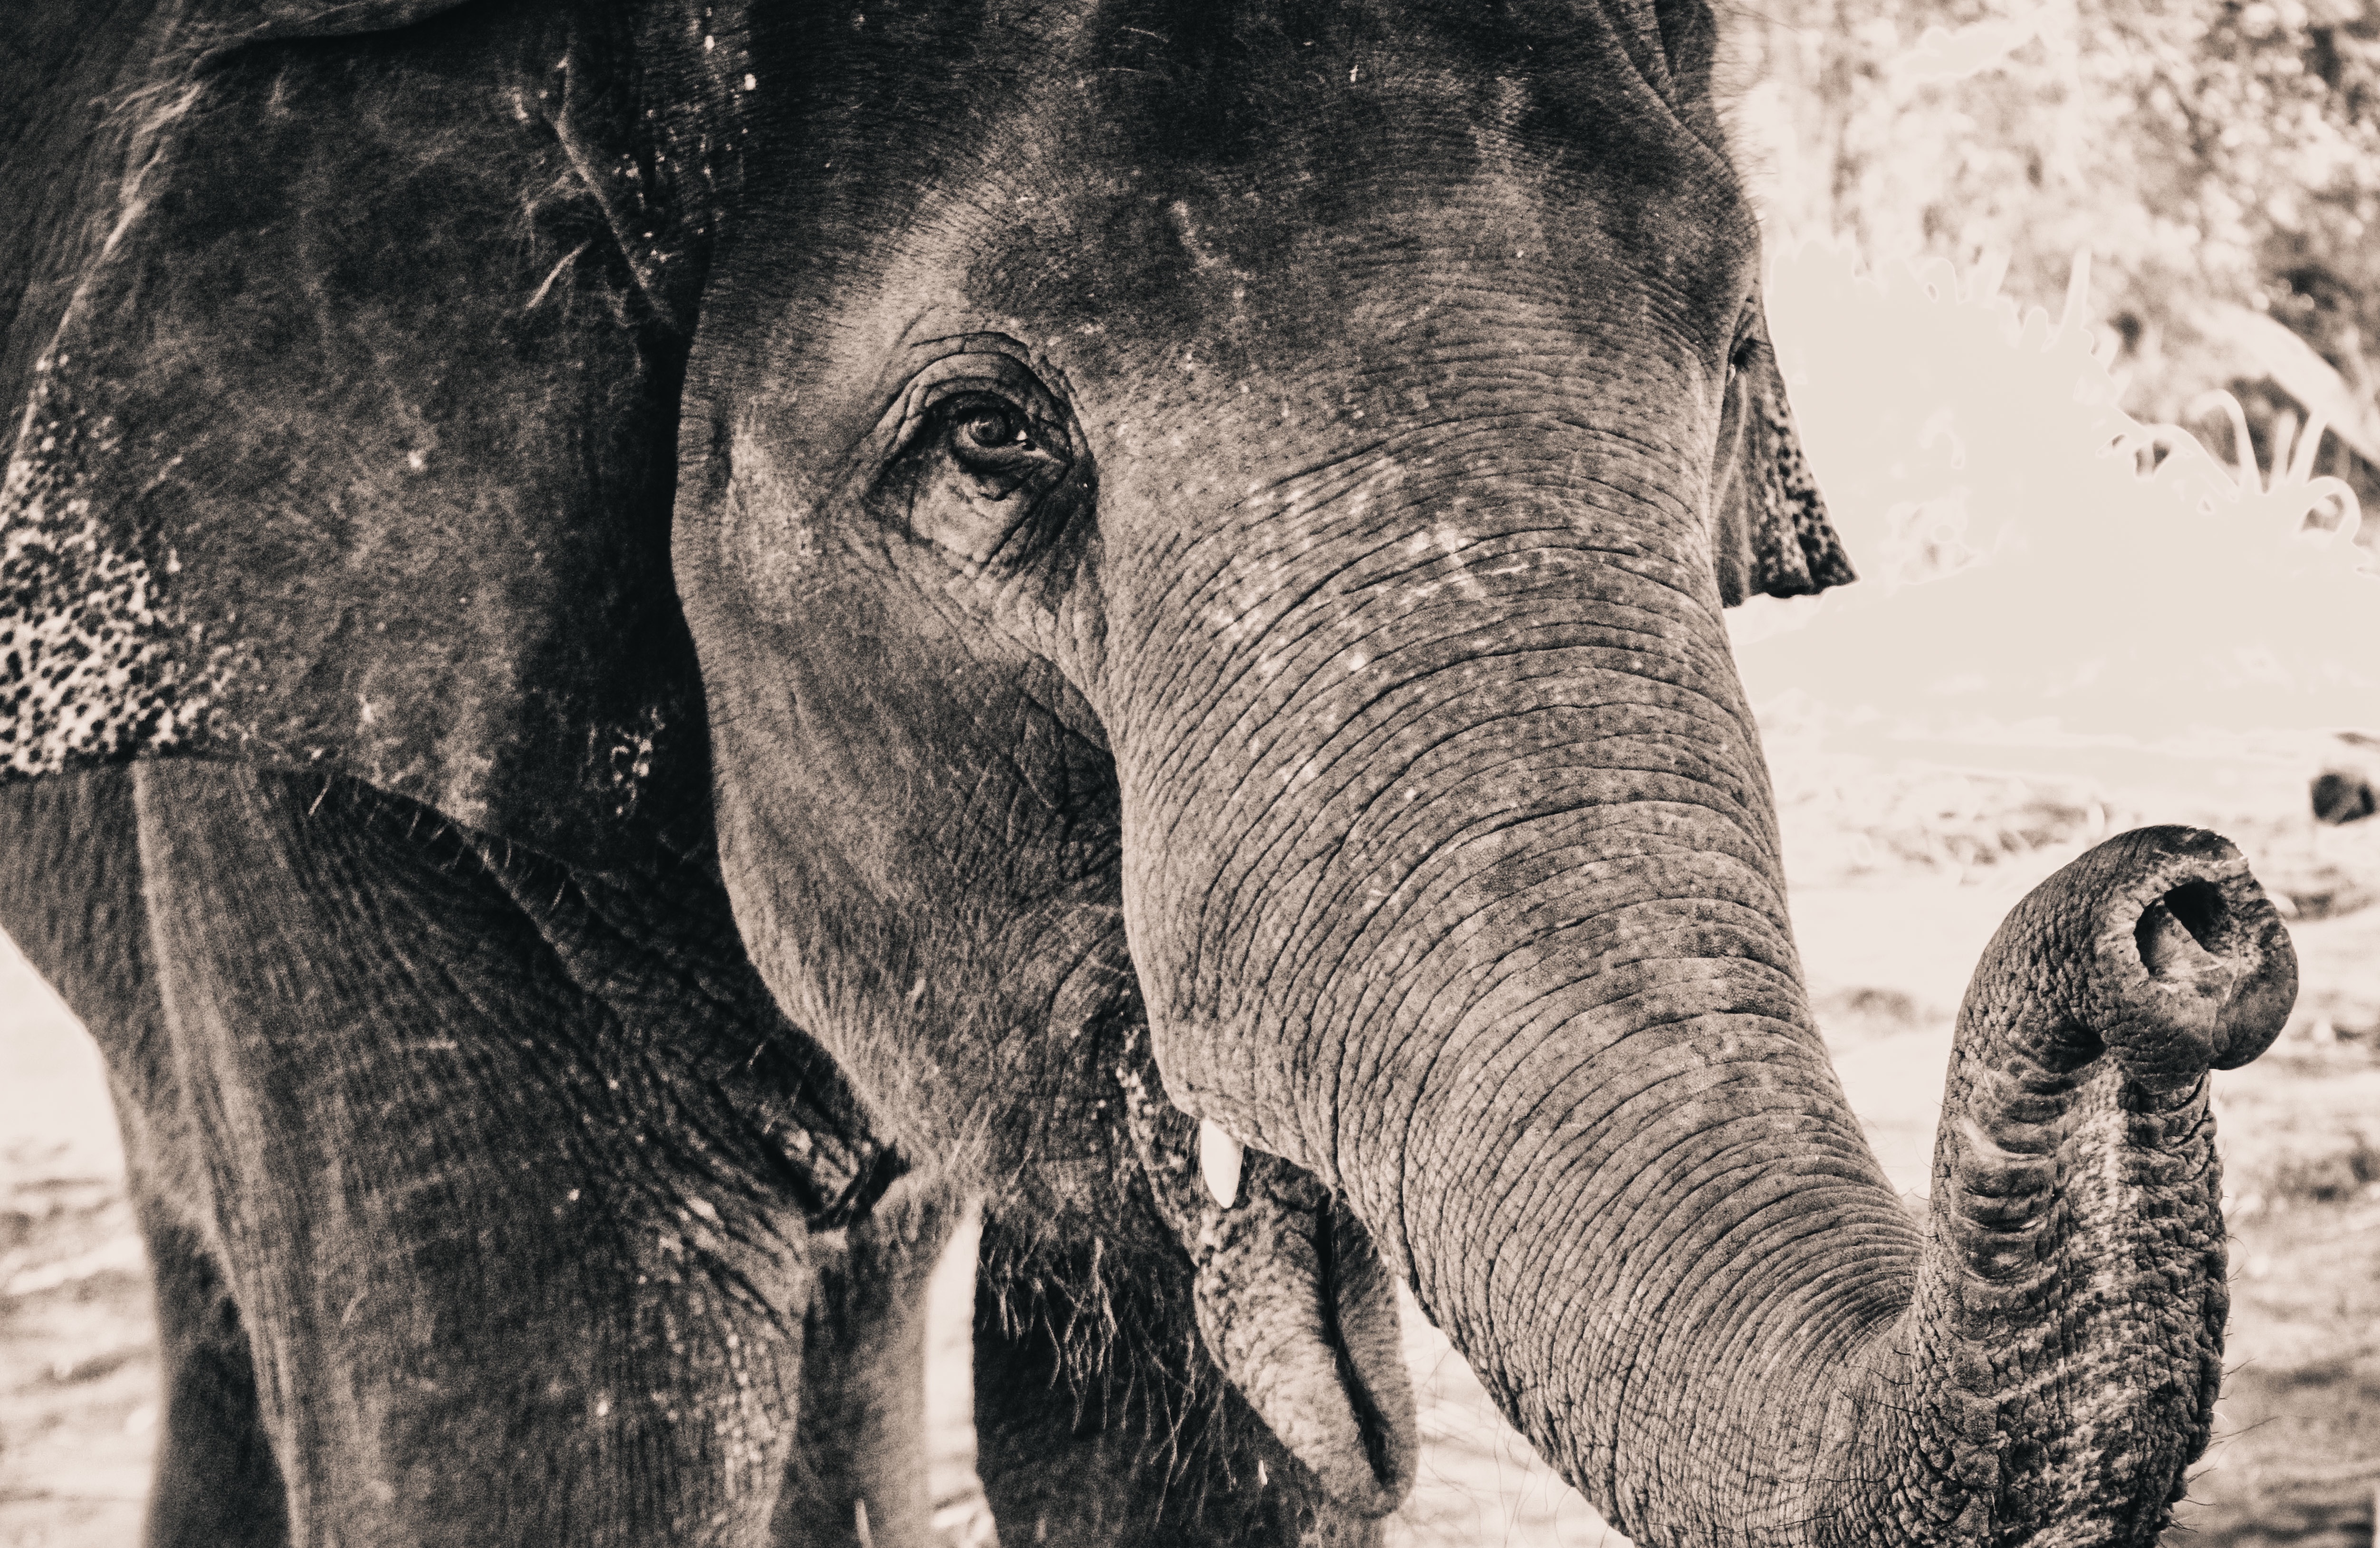 Wallpapers black and white trunk animal on the desktop